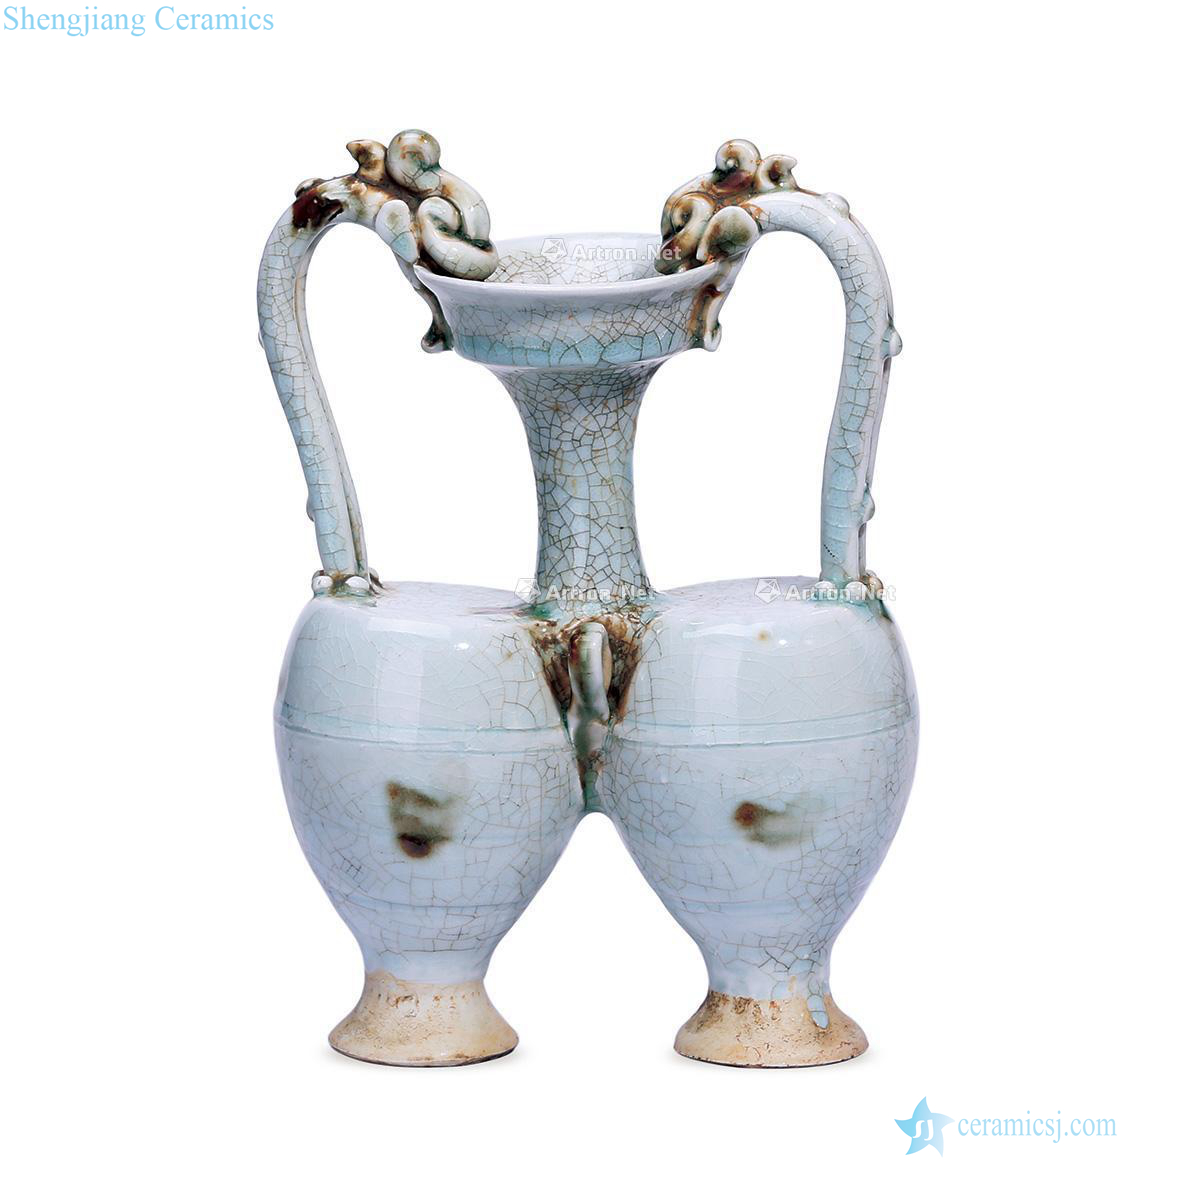 The song dynasty Left kiln tsing lung conjoined bottle handle